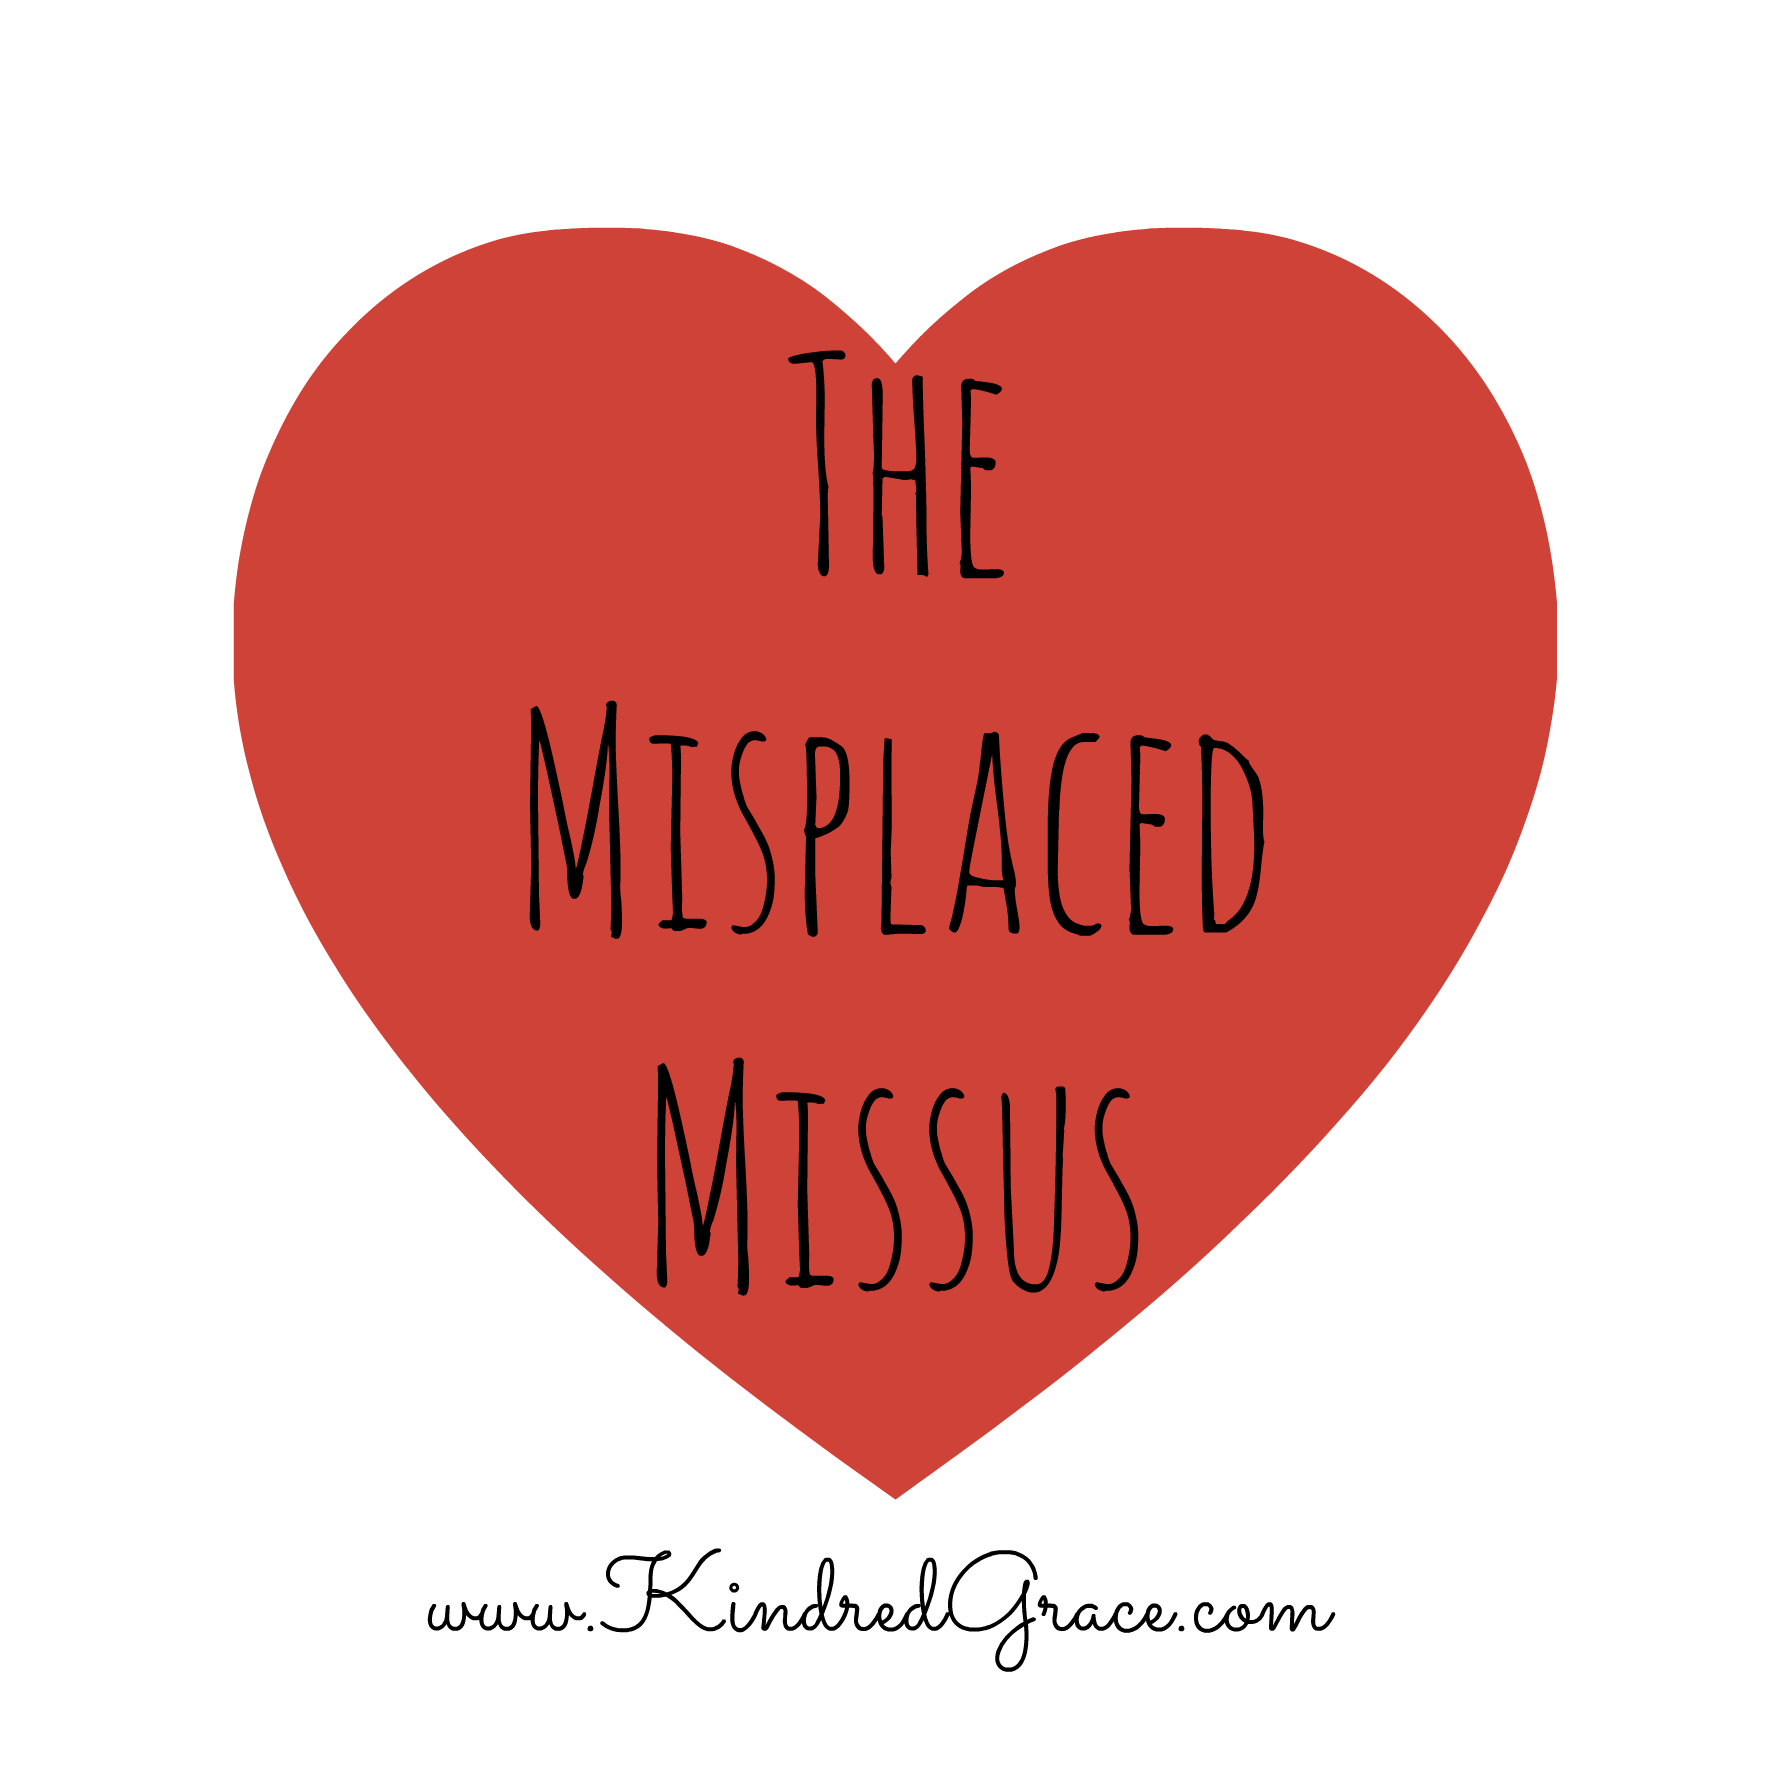 The Misplaced Missus